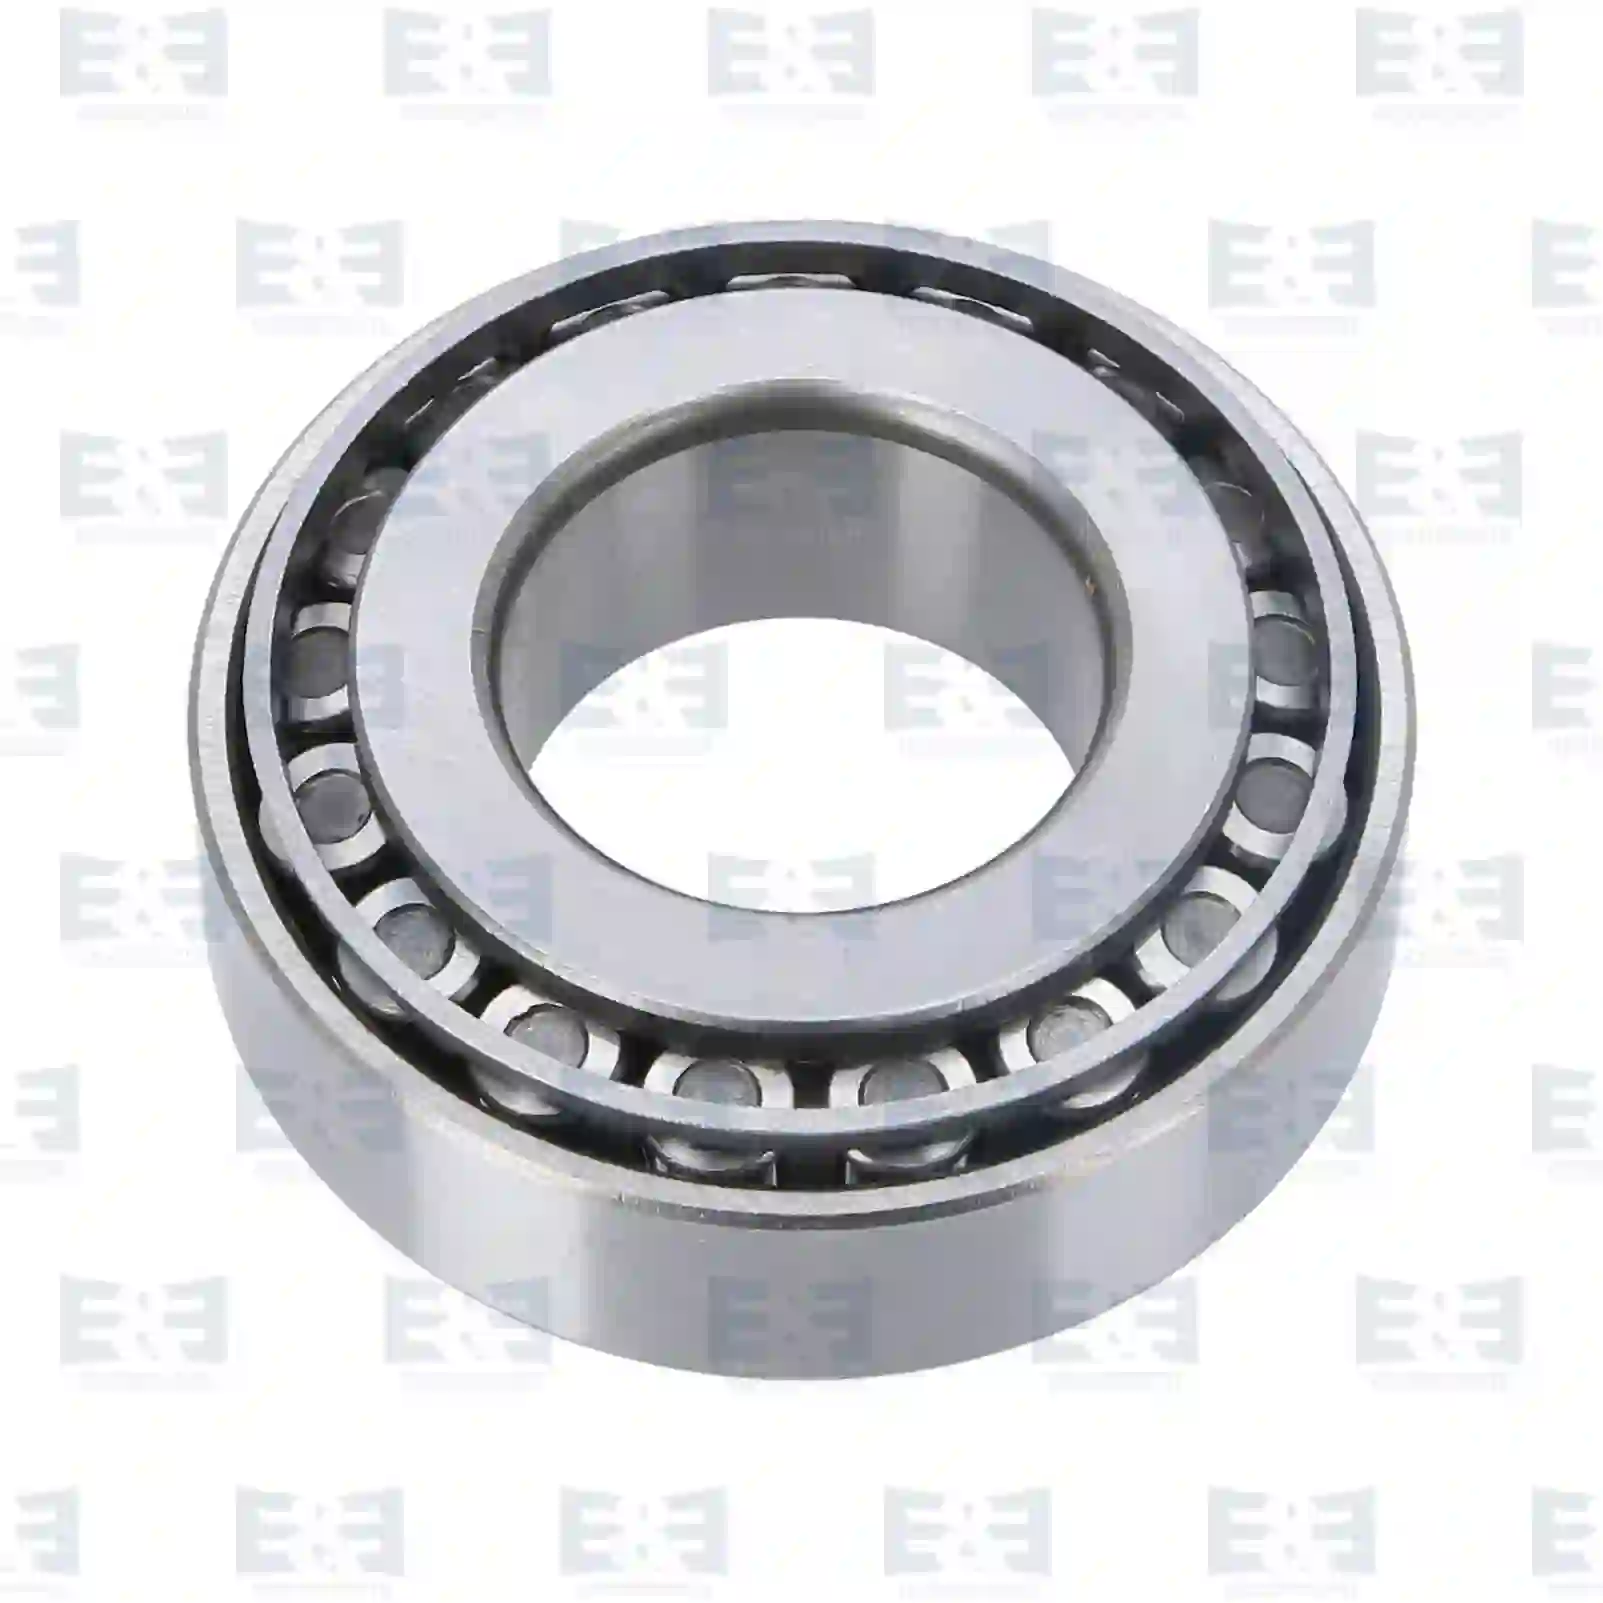 Bearings Tapered roller bearing, EE No 2E2286294 ,  oem no:ABL5781, ABU8700, 01905300, 01564990, 01905300, 3661013600, 272716, 354076, 022370SI, 22370, 52828, 183326 E&E Truck Spare Parts | Truck Spare Parts, Auotomotive Spare Parts